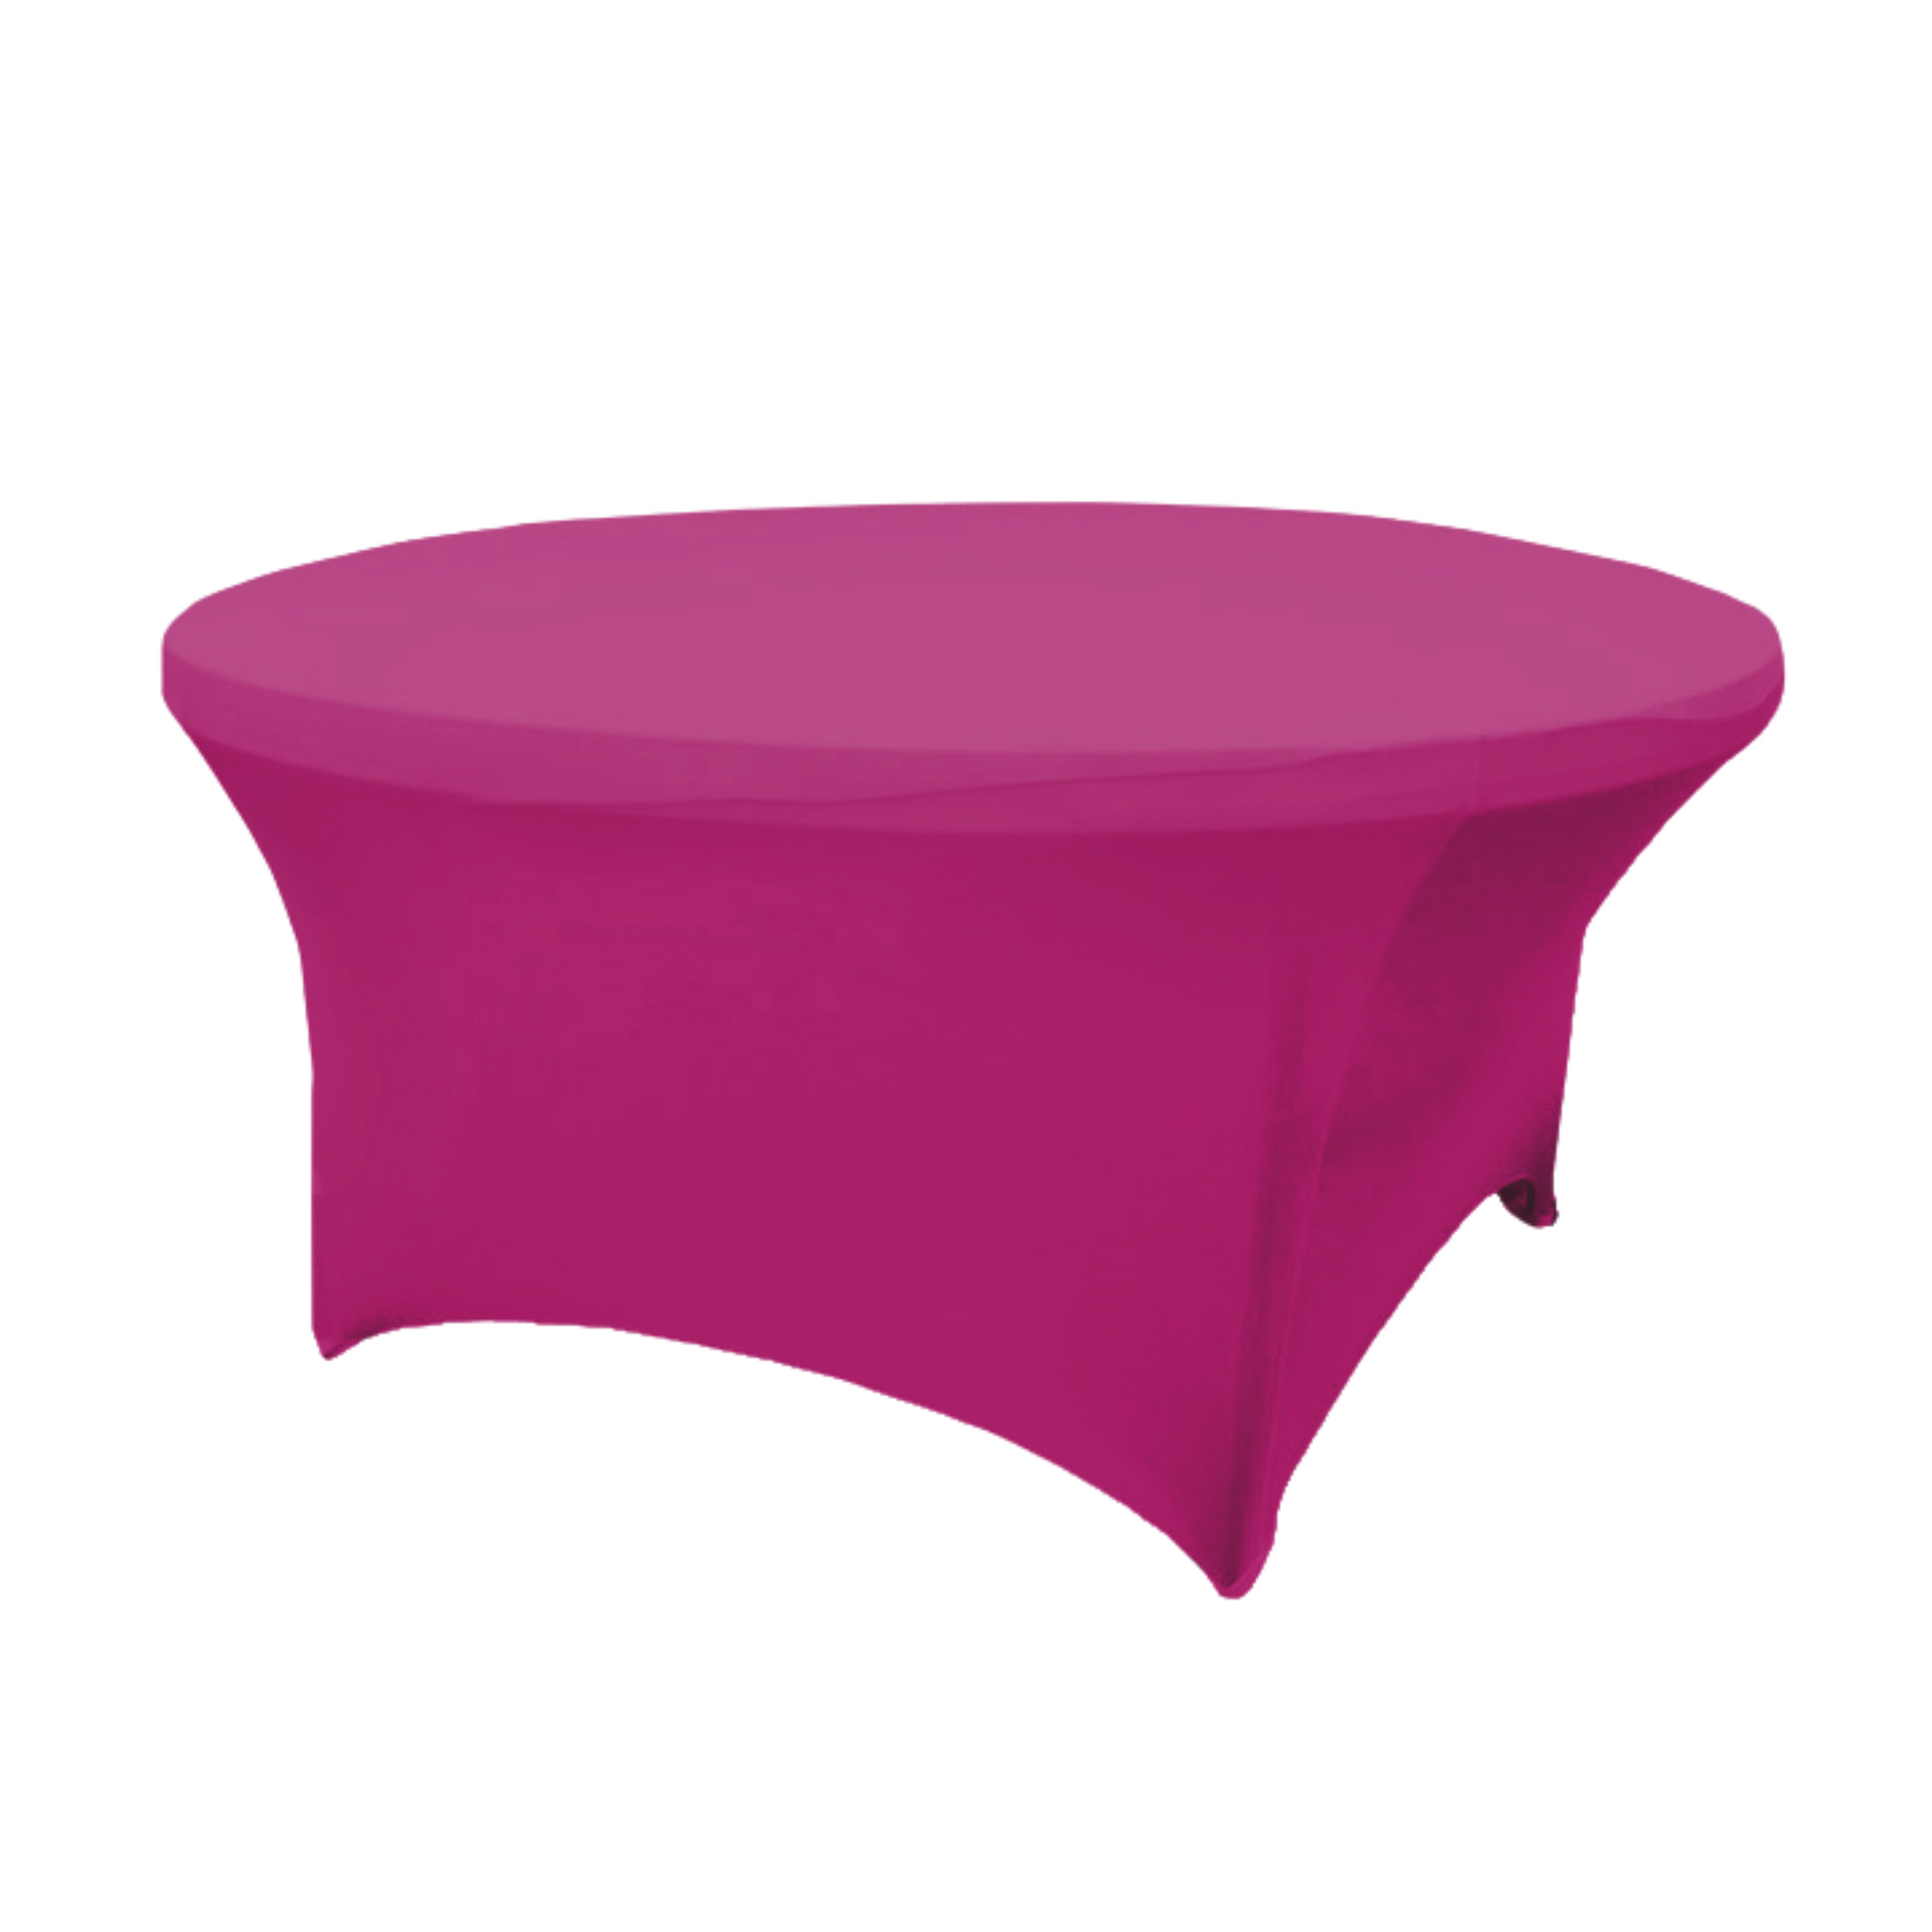 5FT Round Spandex Table Cover - Mulberry